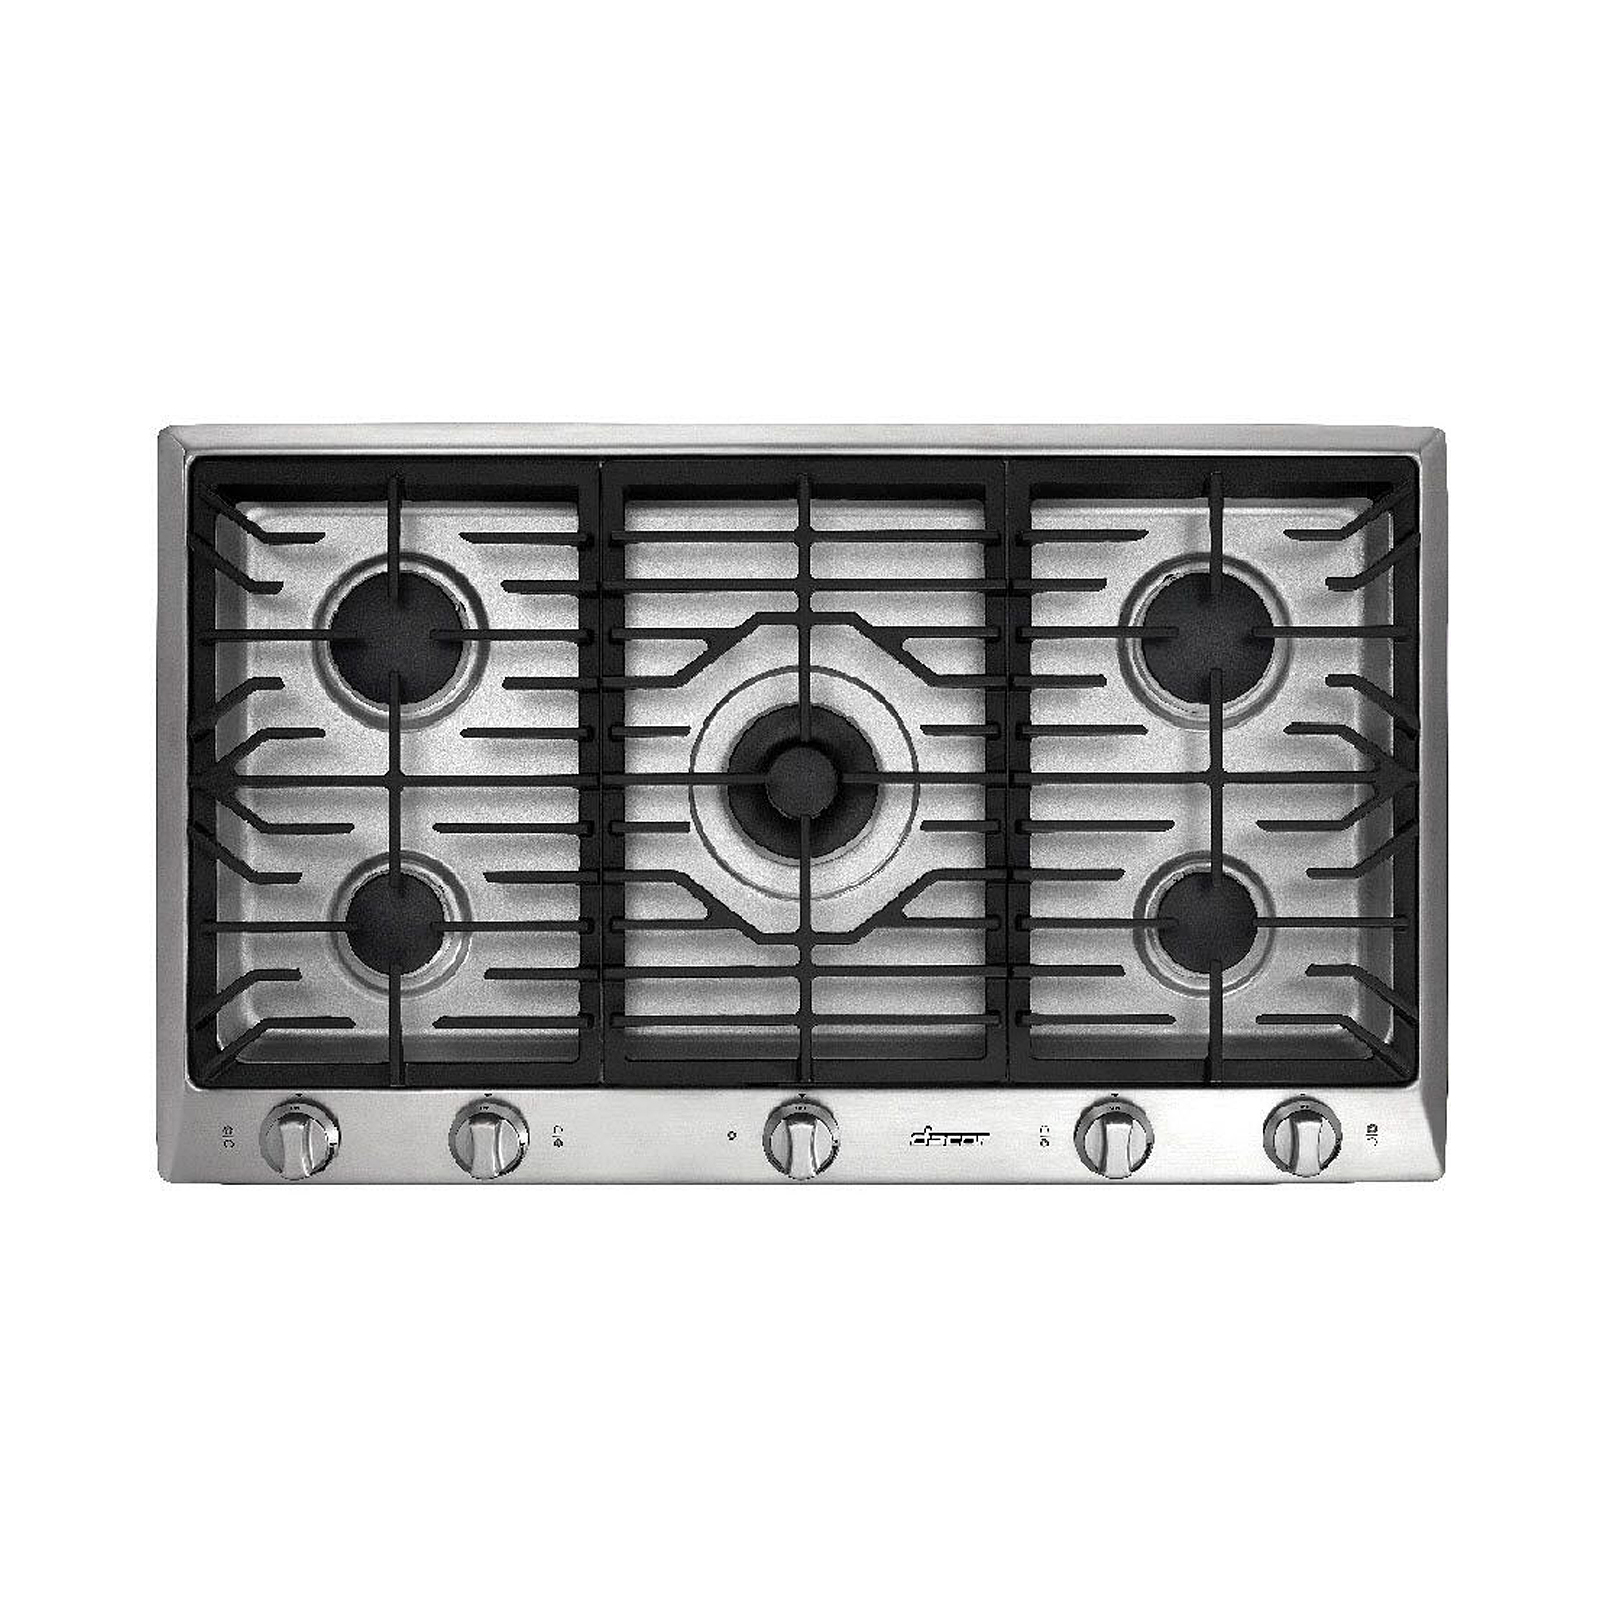 Where can a Dacor cooktop be purchased?